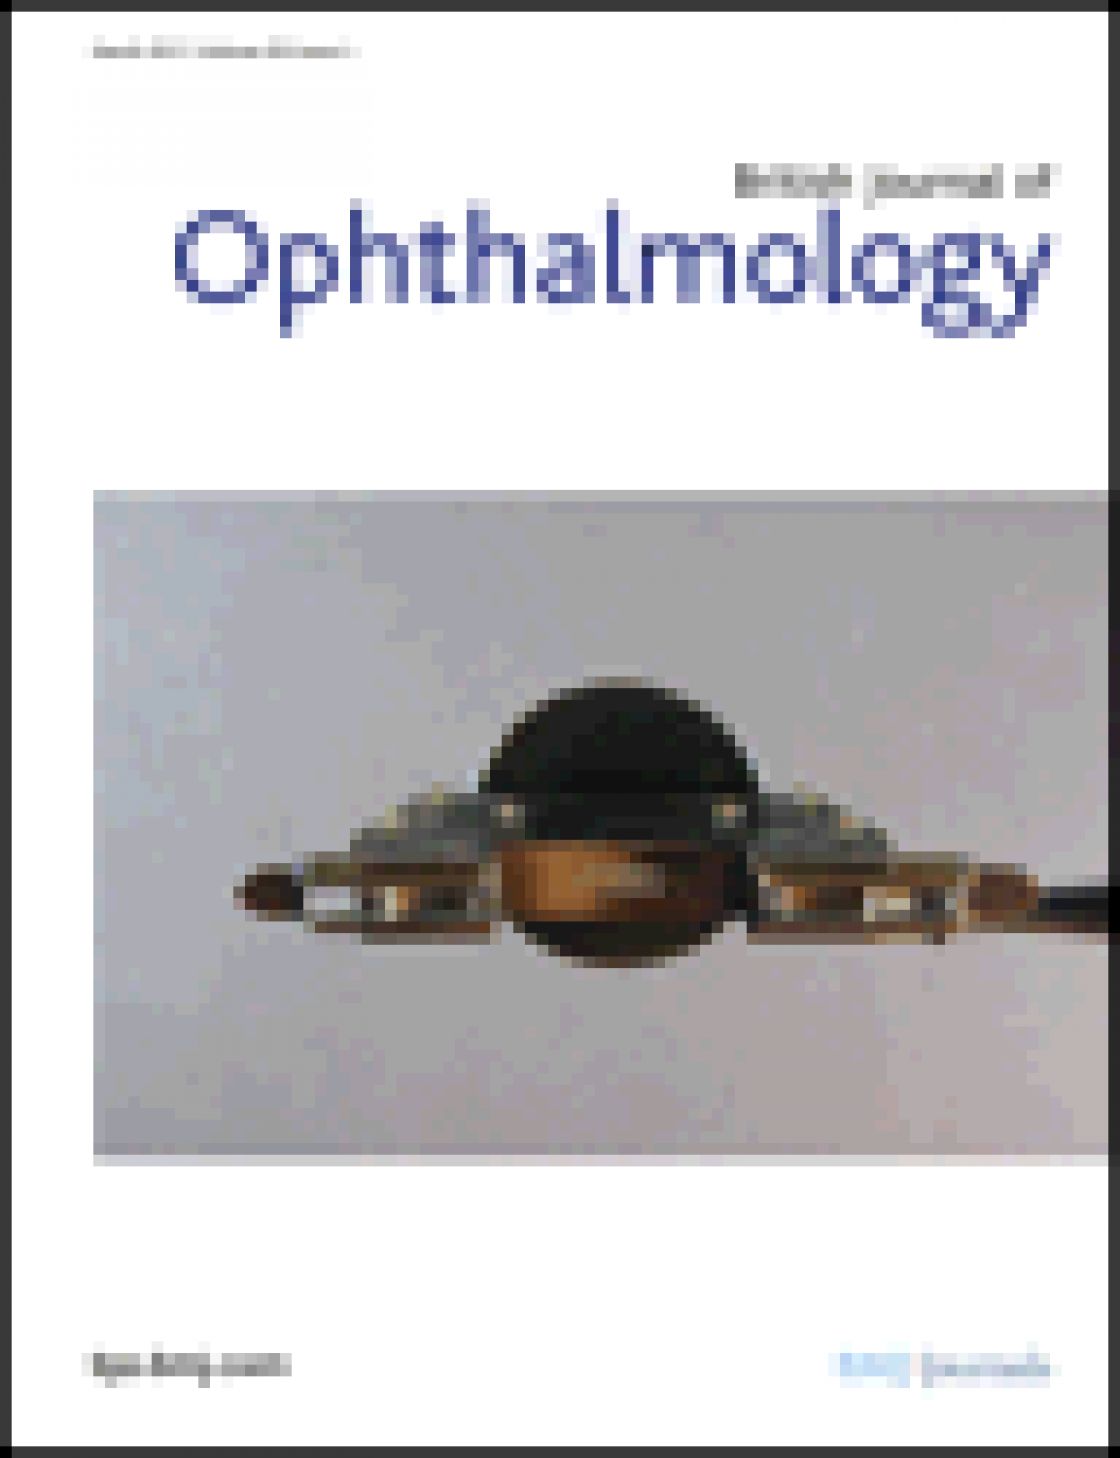 Cataract surgery in posterior polymorphous corneal dystrophy